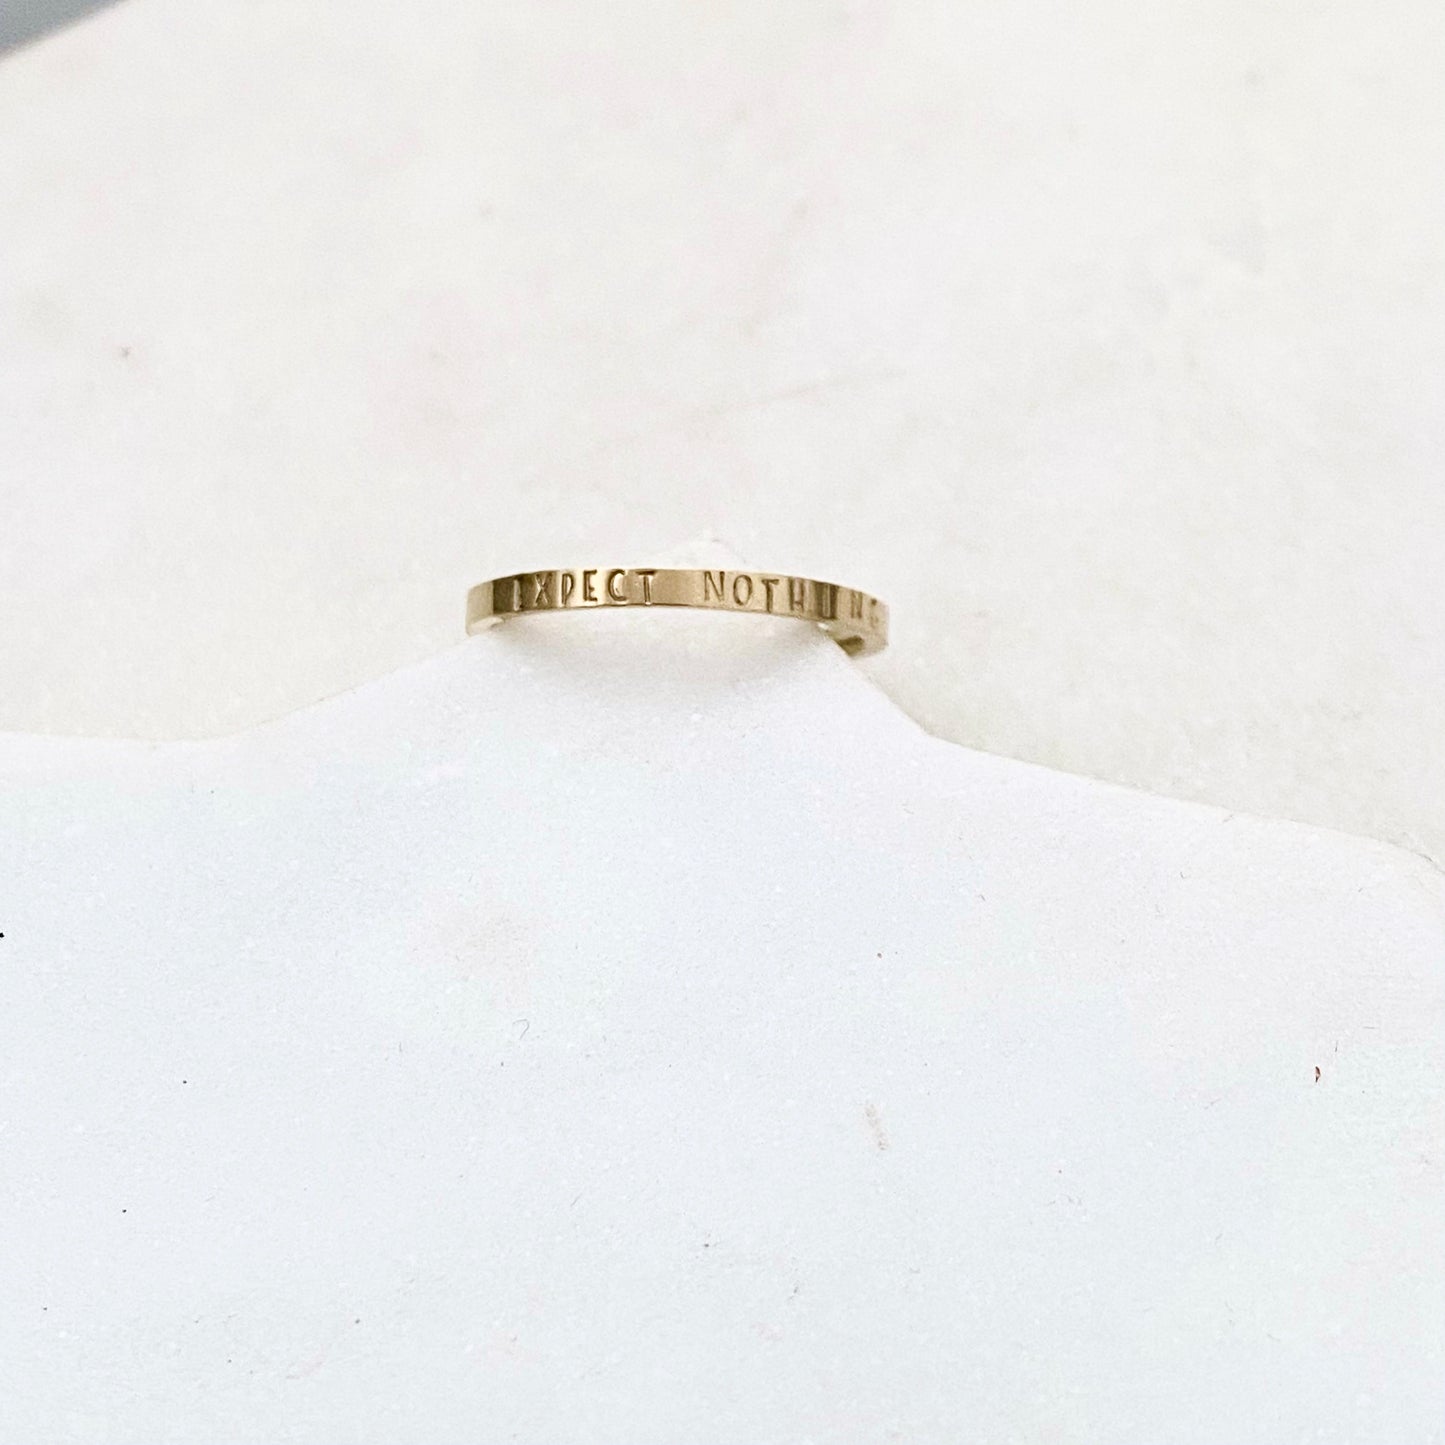 Expect Nothing, Size 9, Gold Mini Stacking Ring, Stainless Steel Jewelry, Minimalist Rings, Waterproof Jewelry, Dainty Ring, Stacking Ring Set Rings callistafaye   